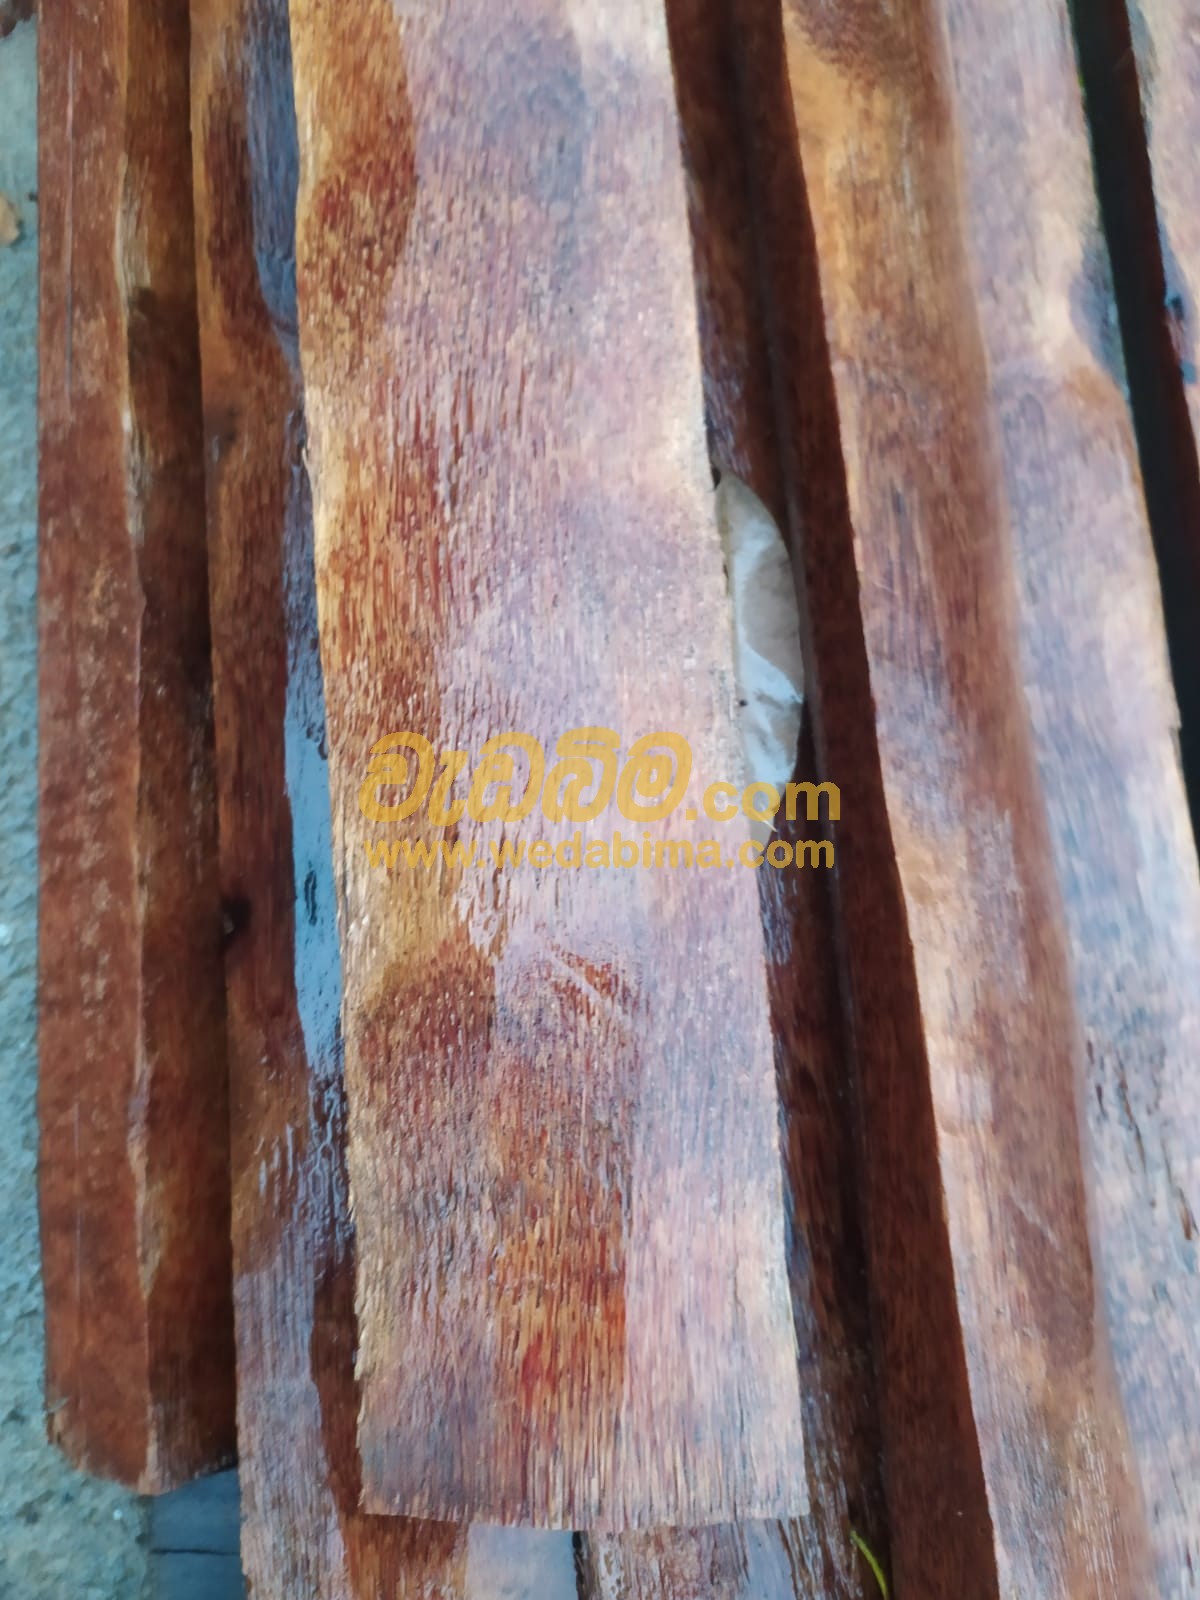 Cover image for Mahogany Wood price in gampaha